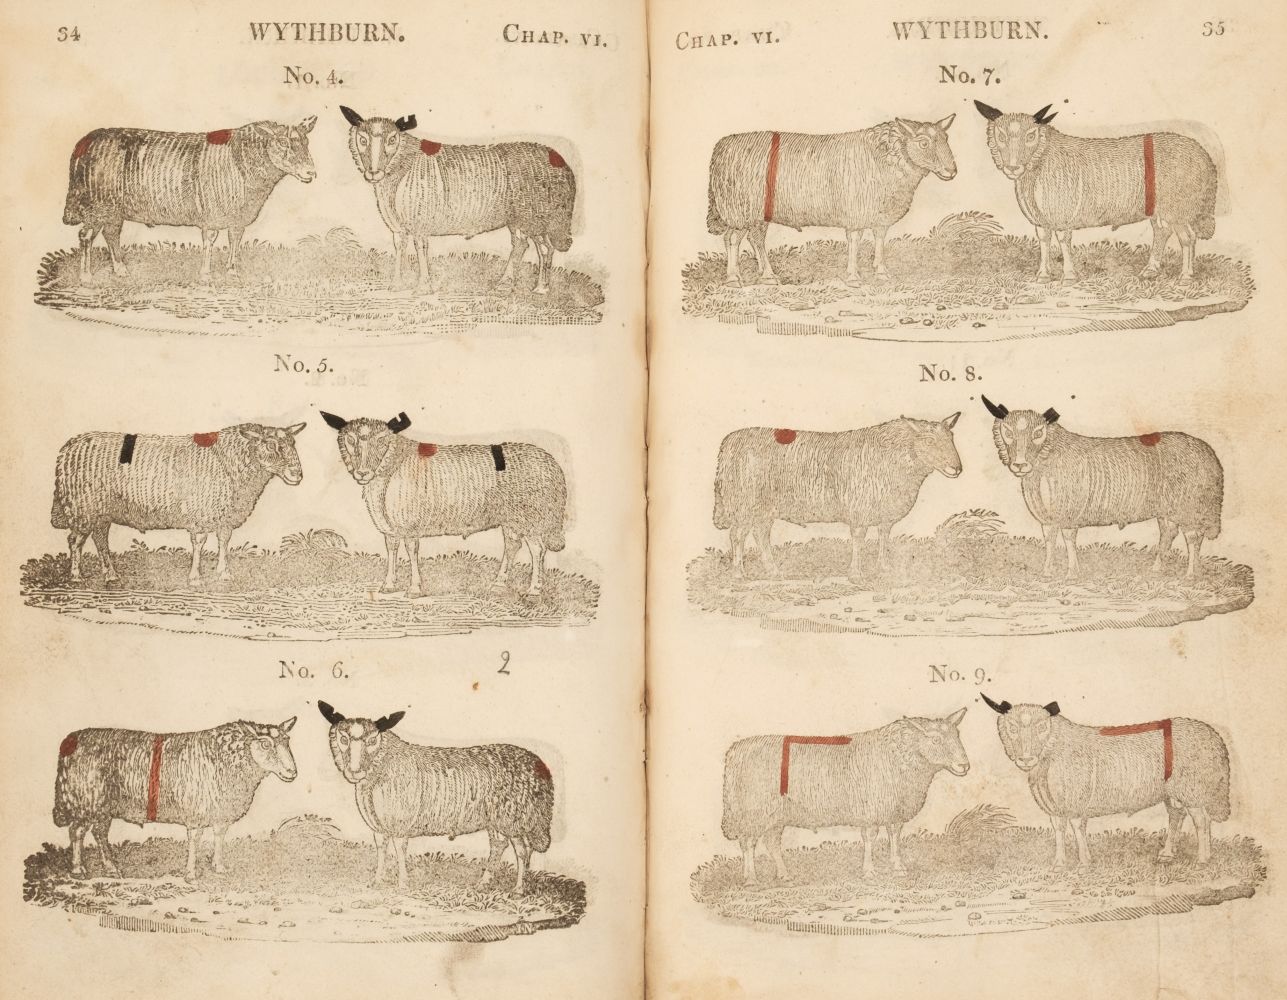 Sheep marks. The Shepherd's Guide, by William Mounsey & William Kirkpatrick